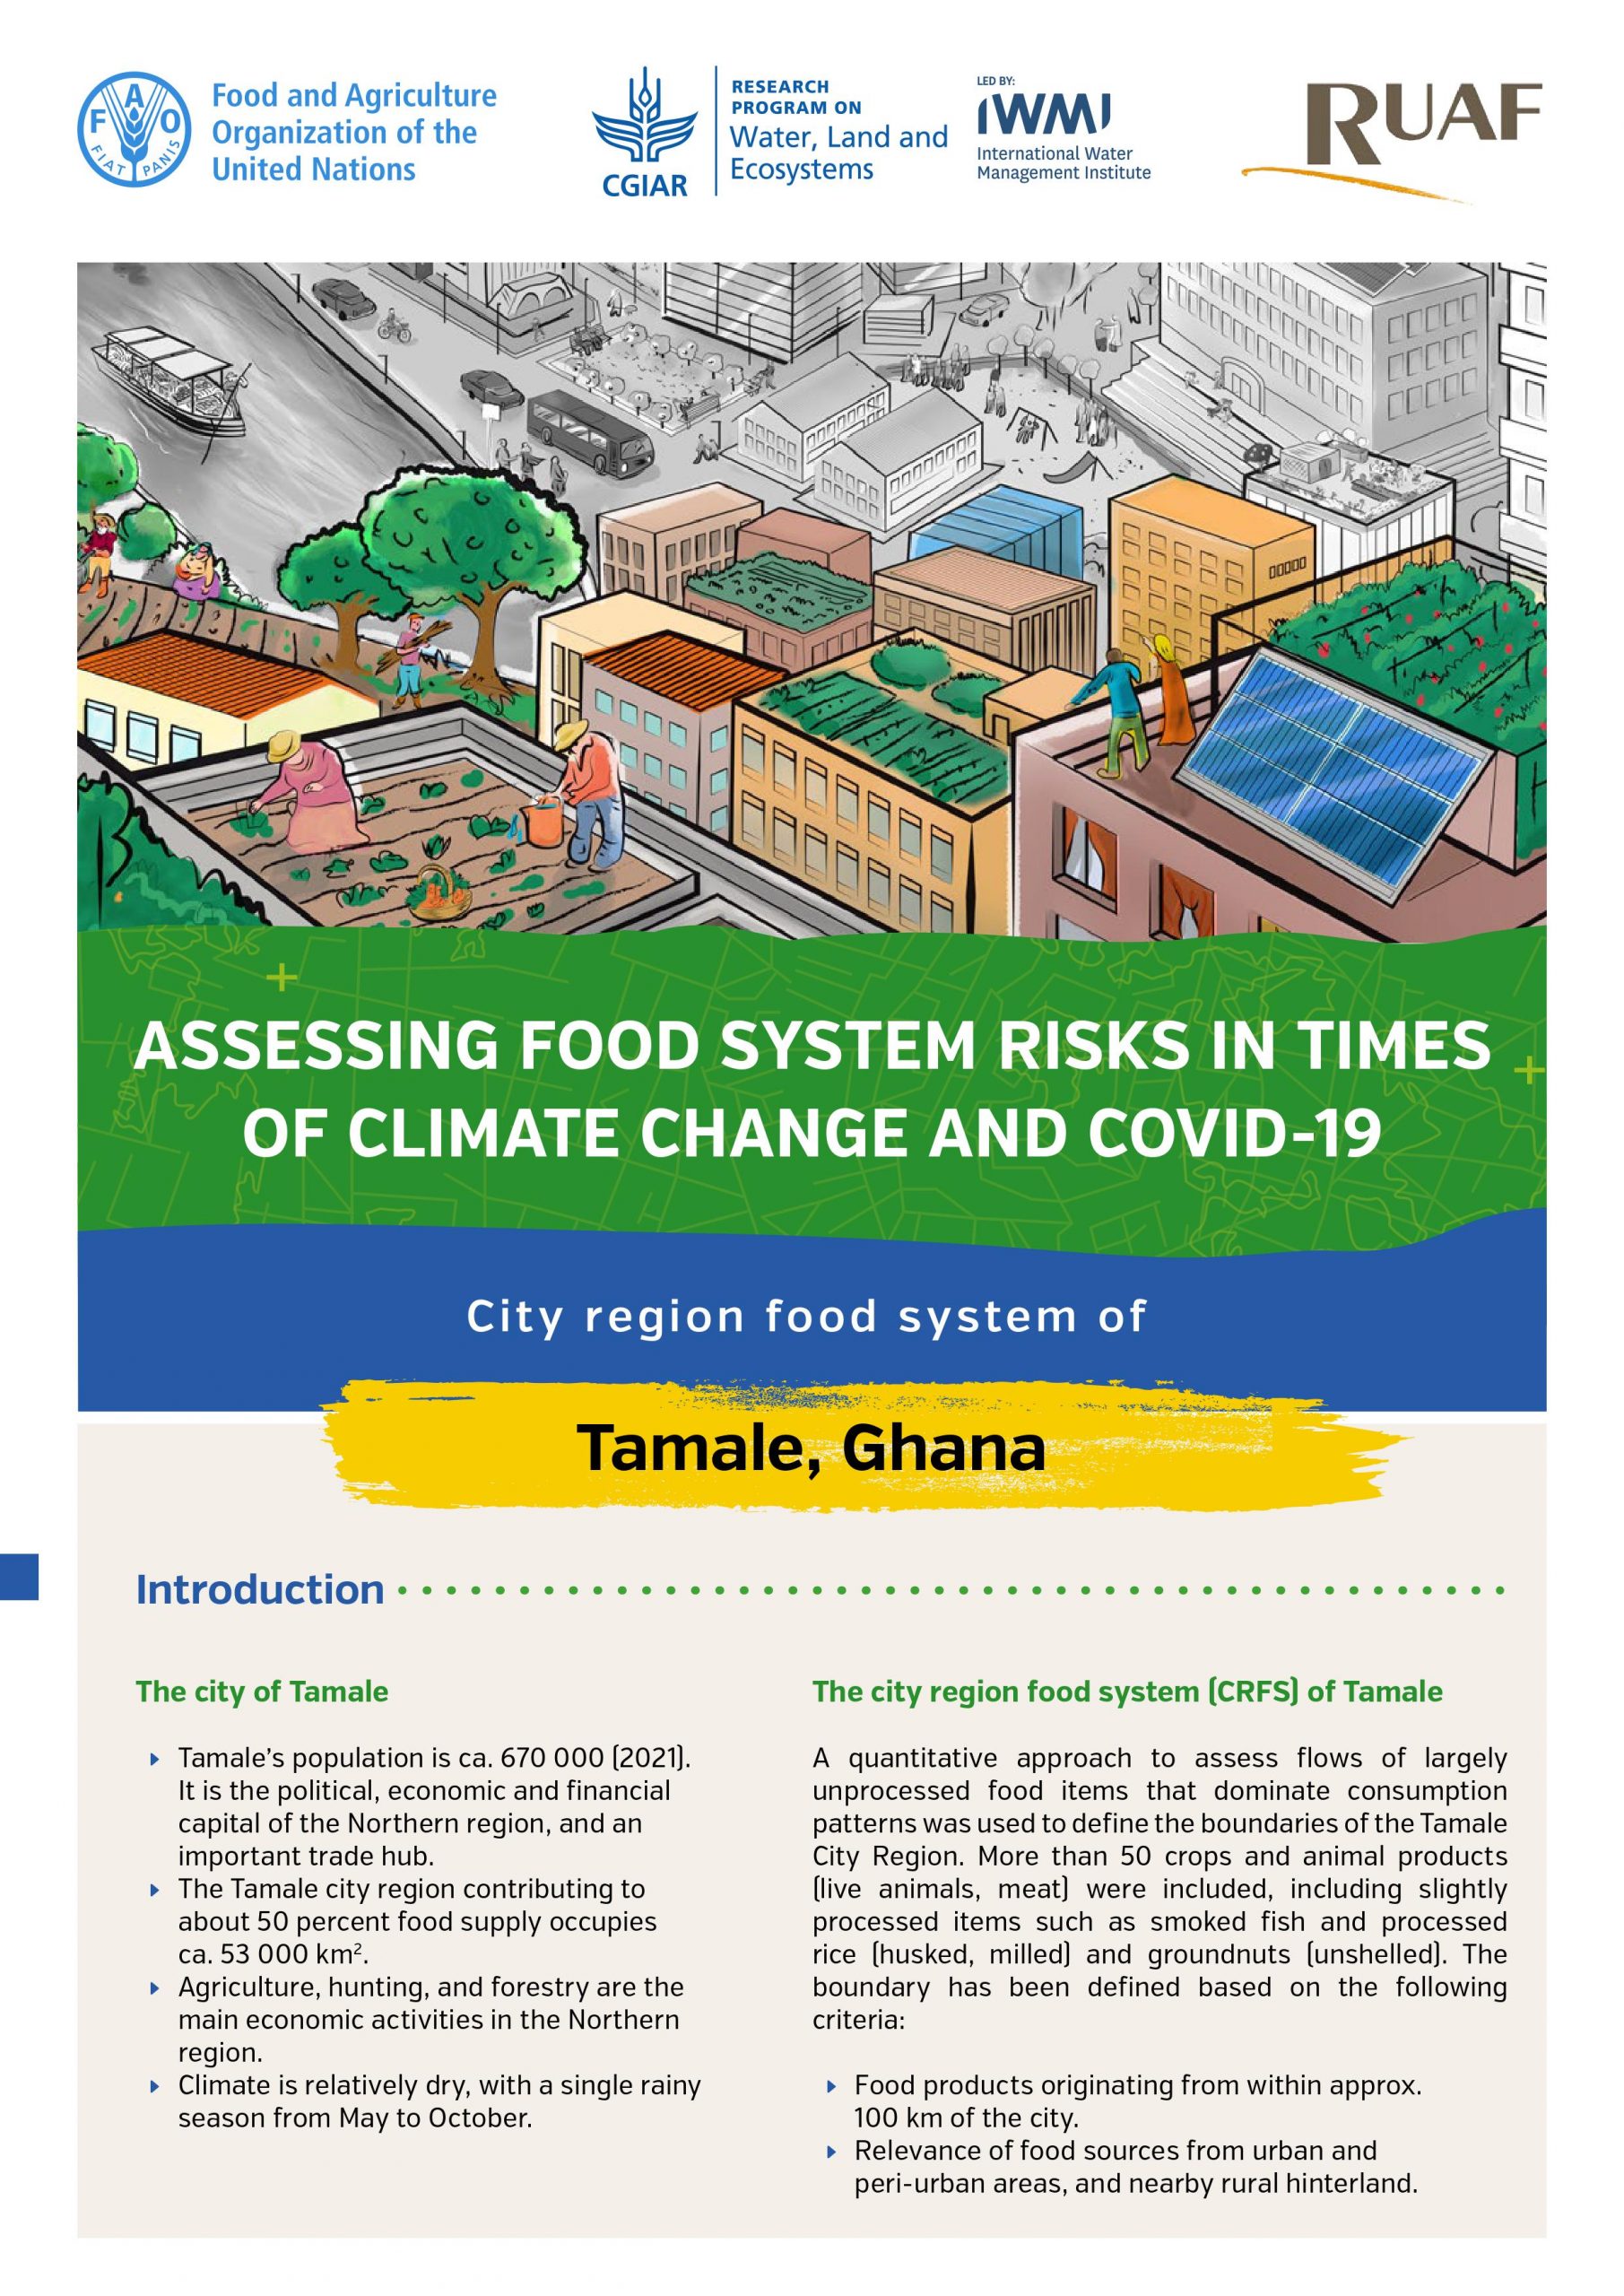 Assessing risk in times of climate change and COVID-19: City region food system of Tamale, Ghana